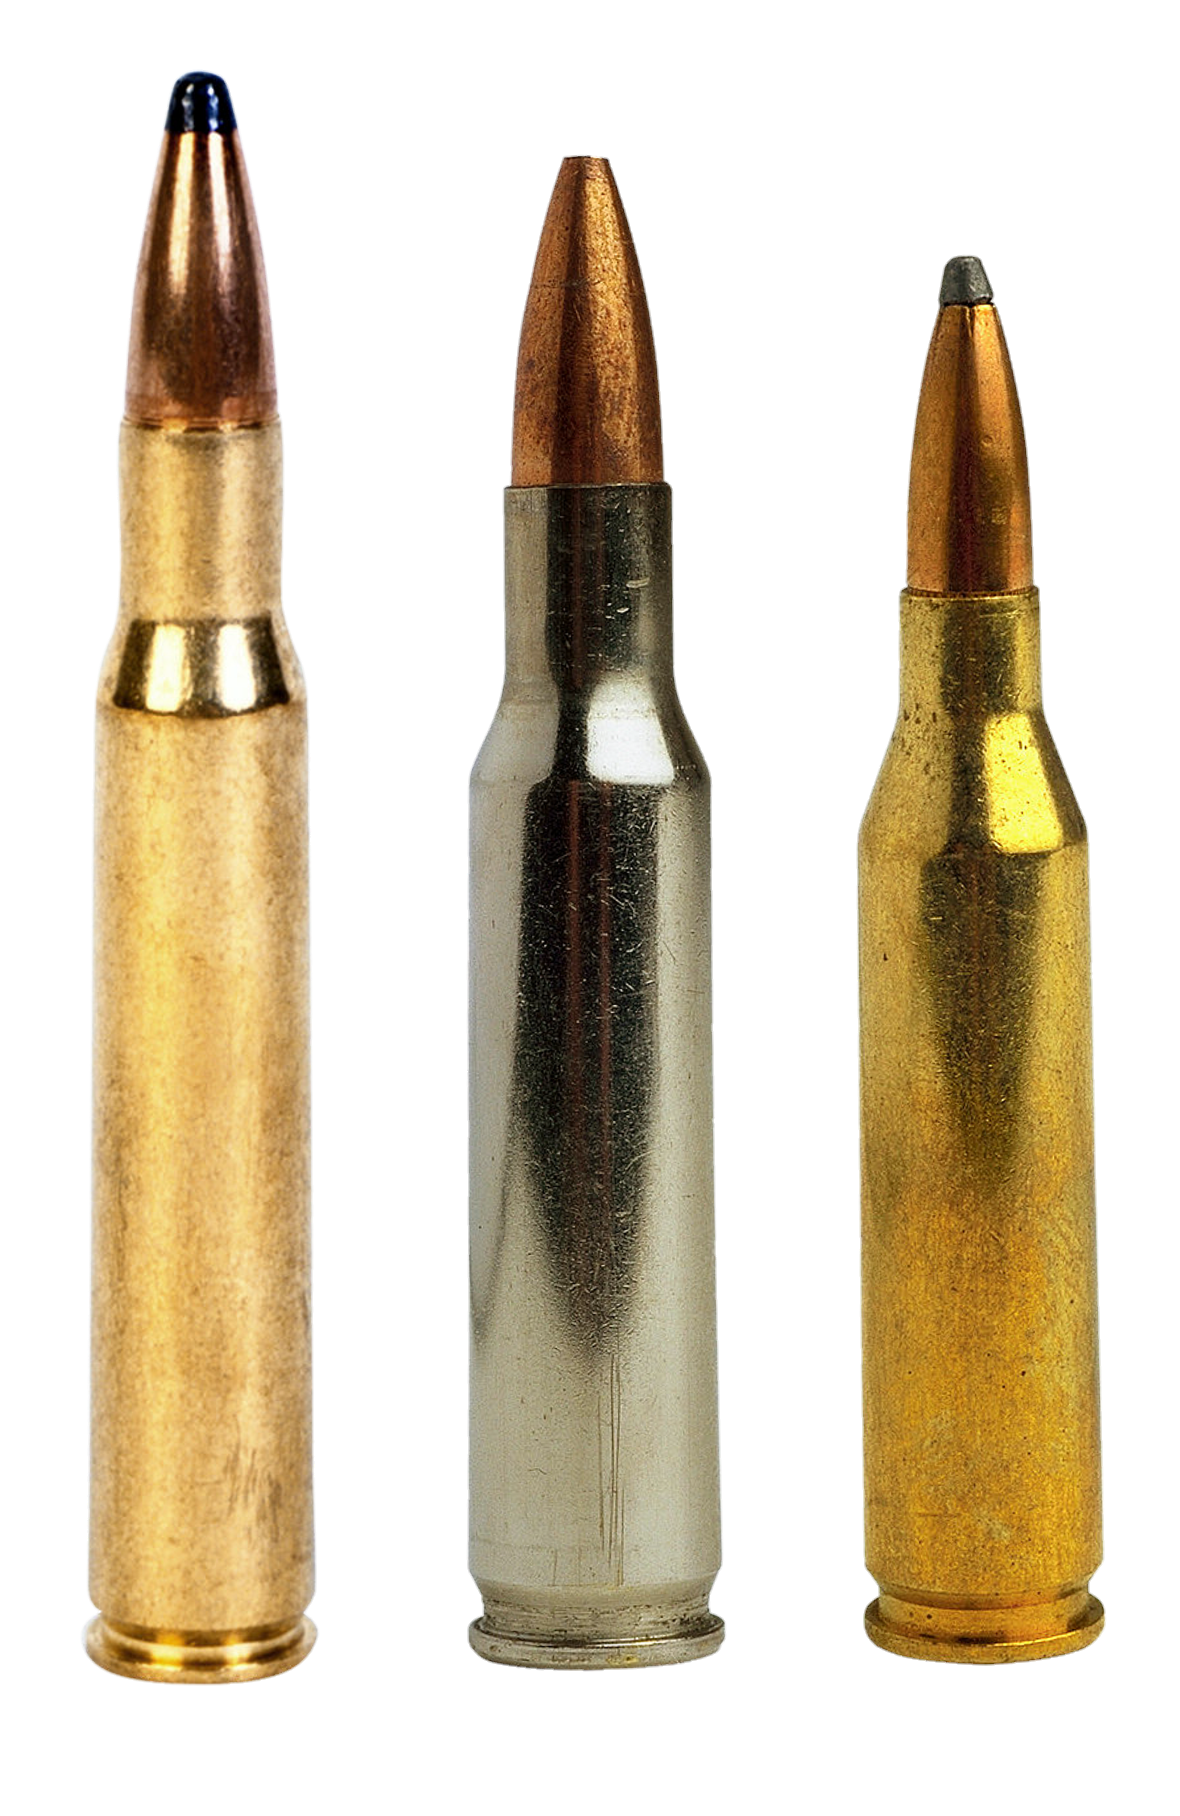 bullet-png-from-pngfre-1